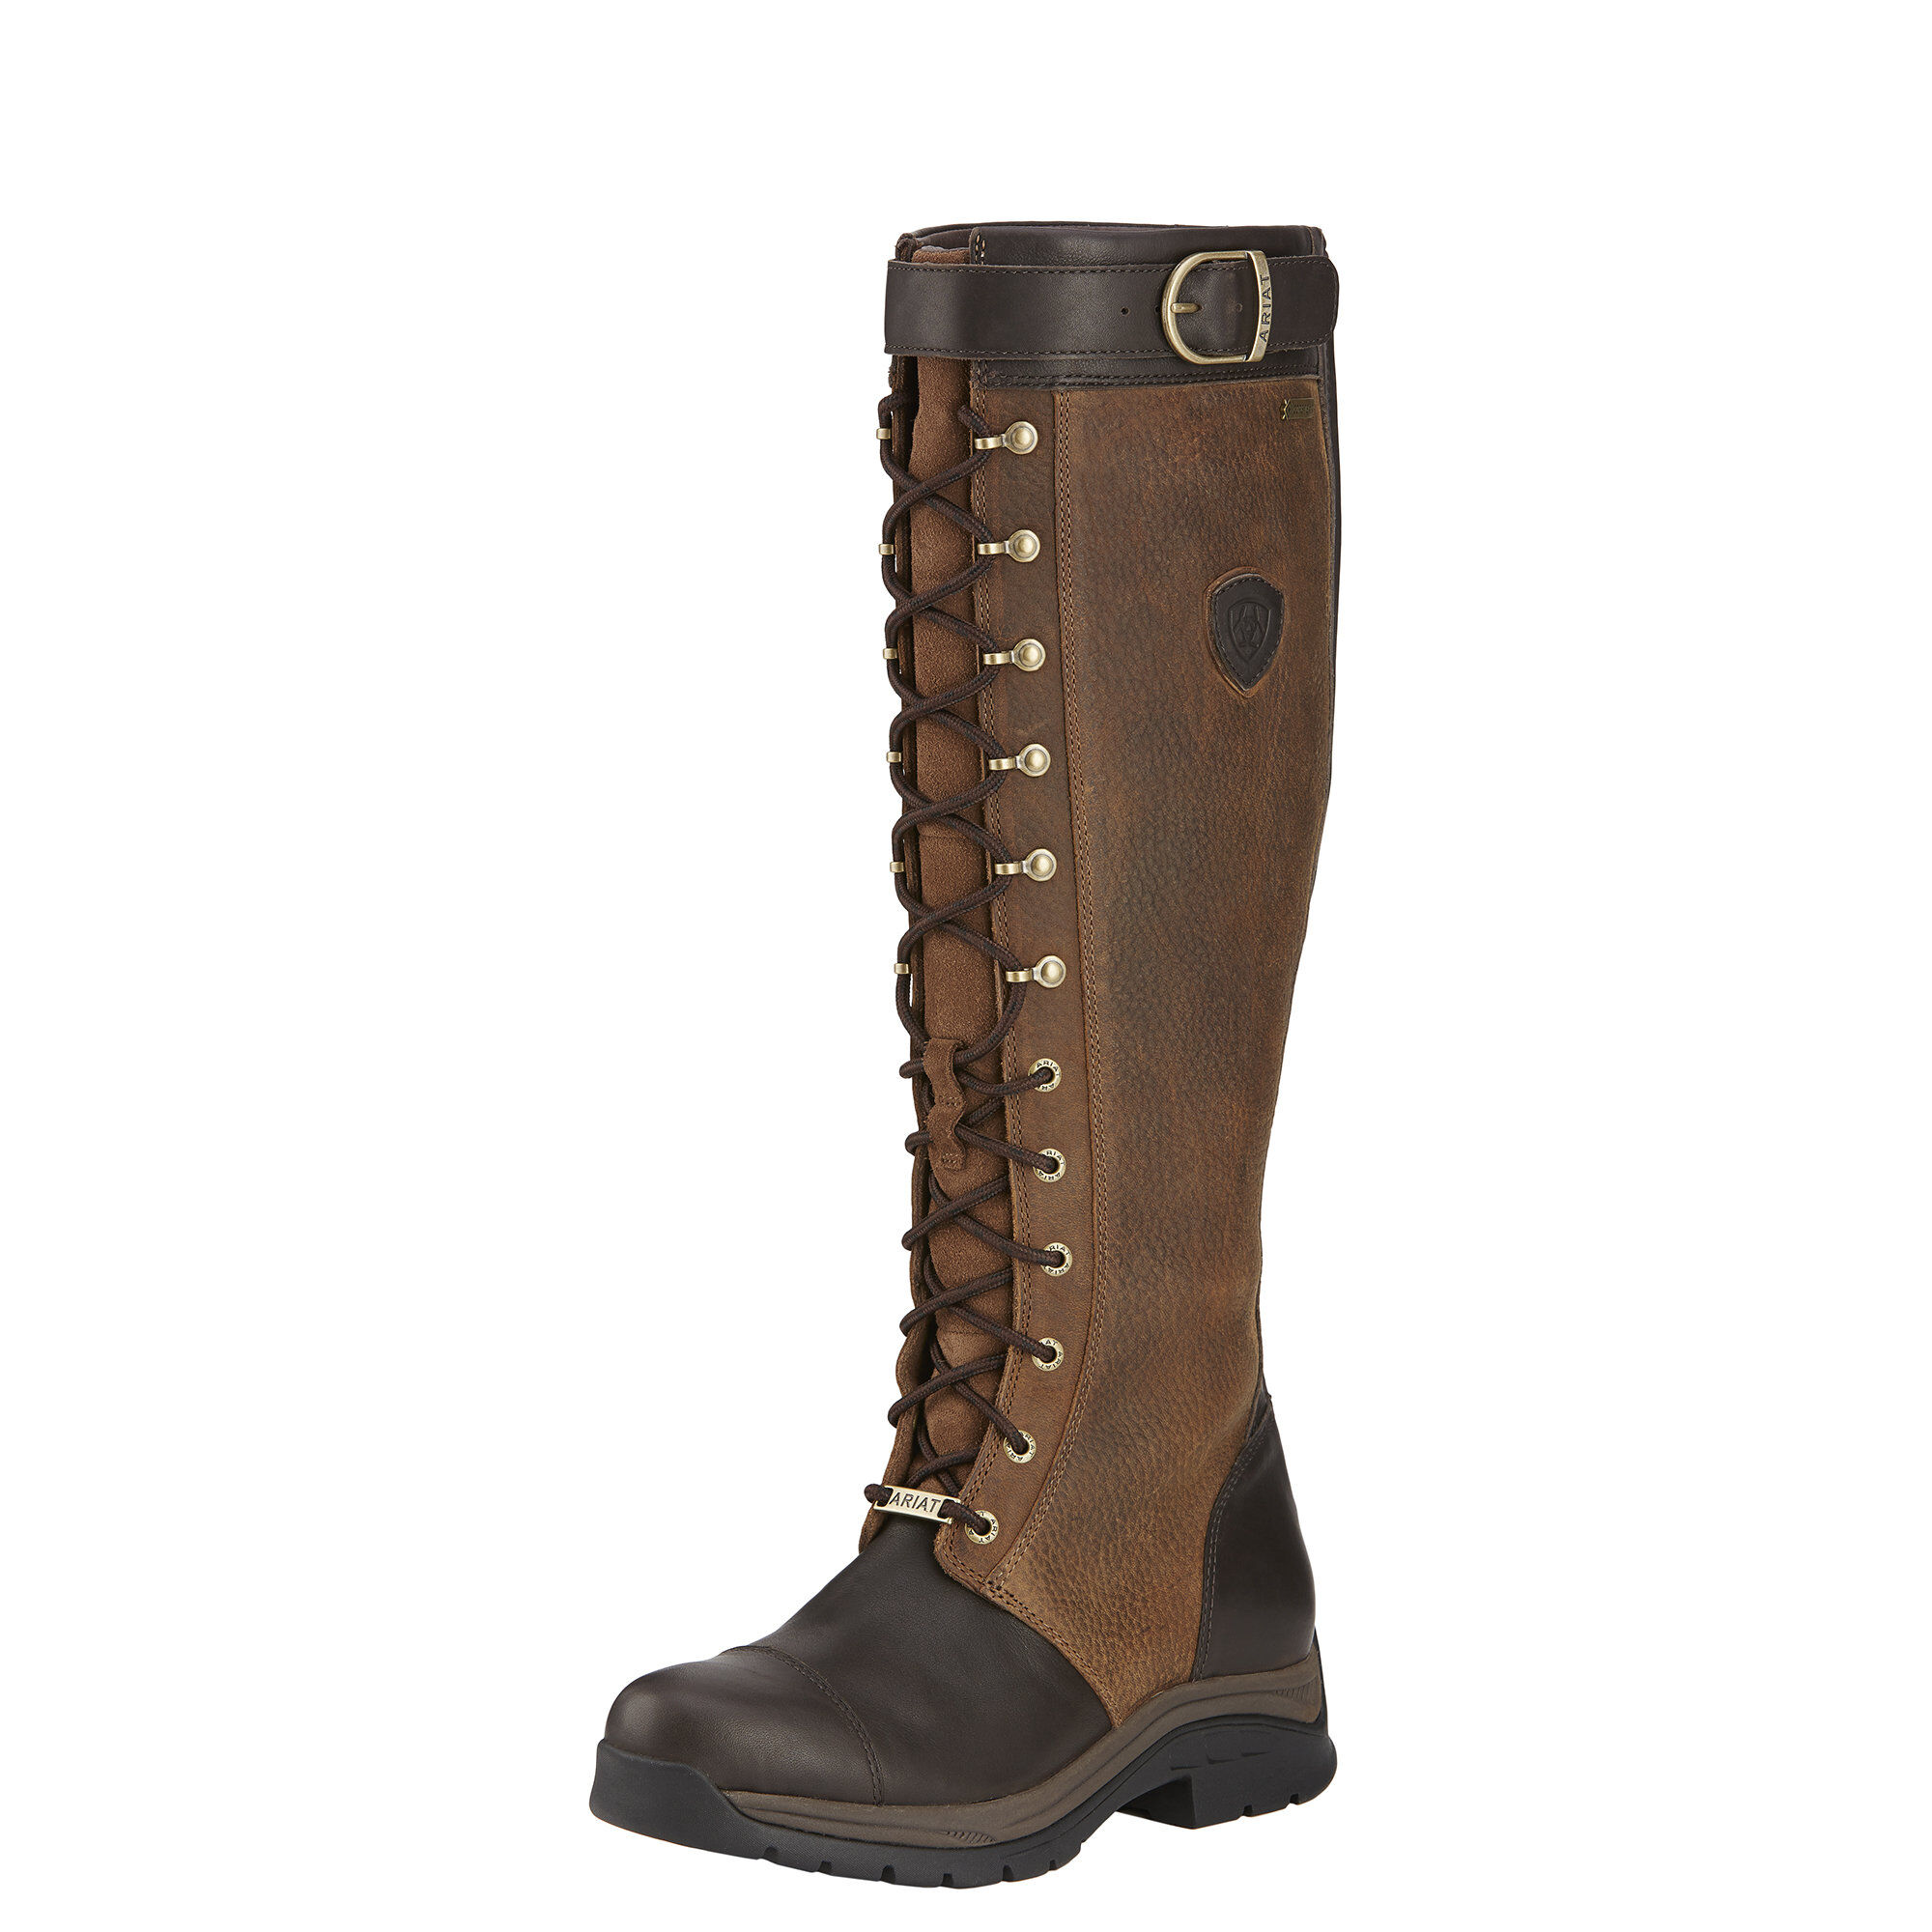 Women's Berwick Gore-Tex Insulated Boots in Ebony Leather  by Ariat